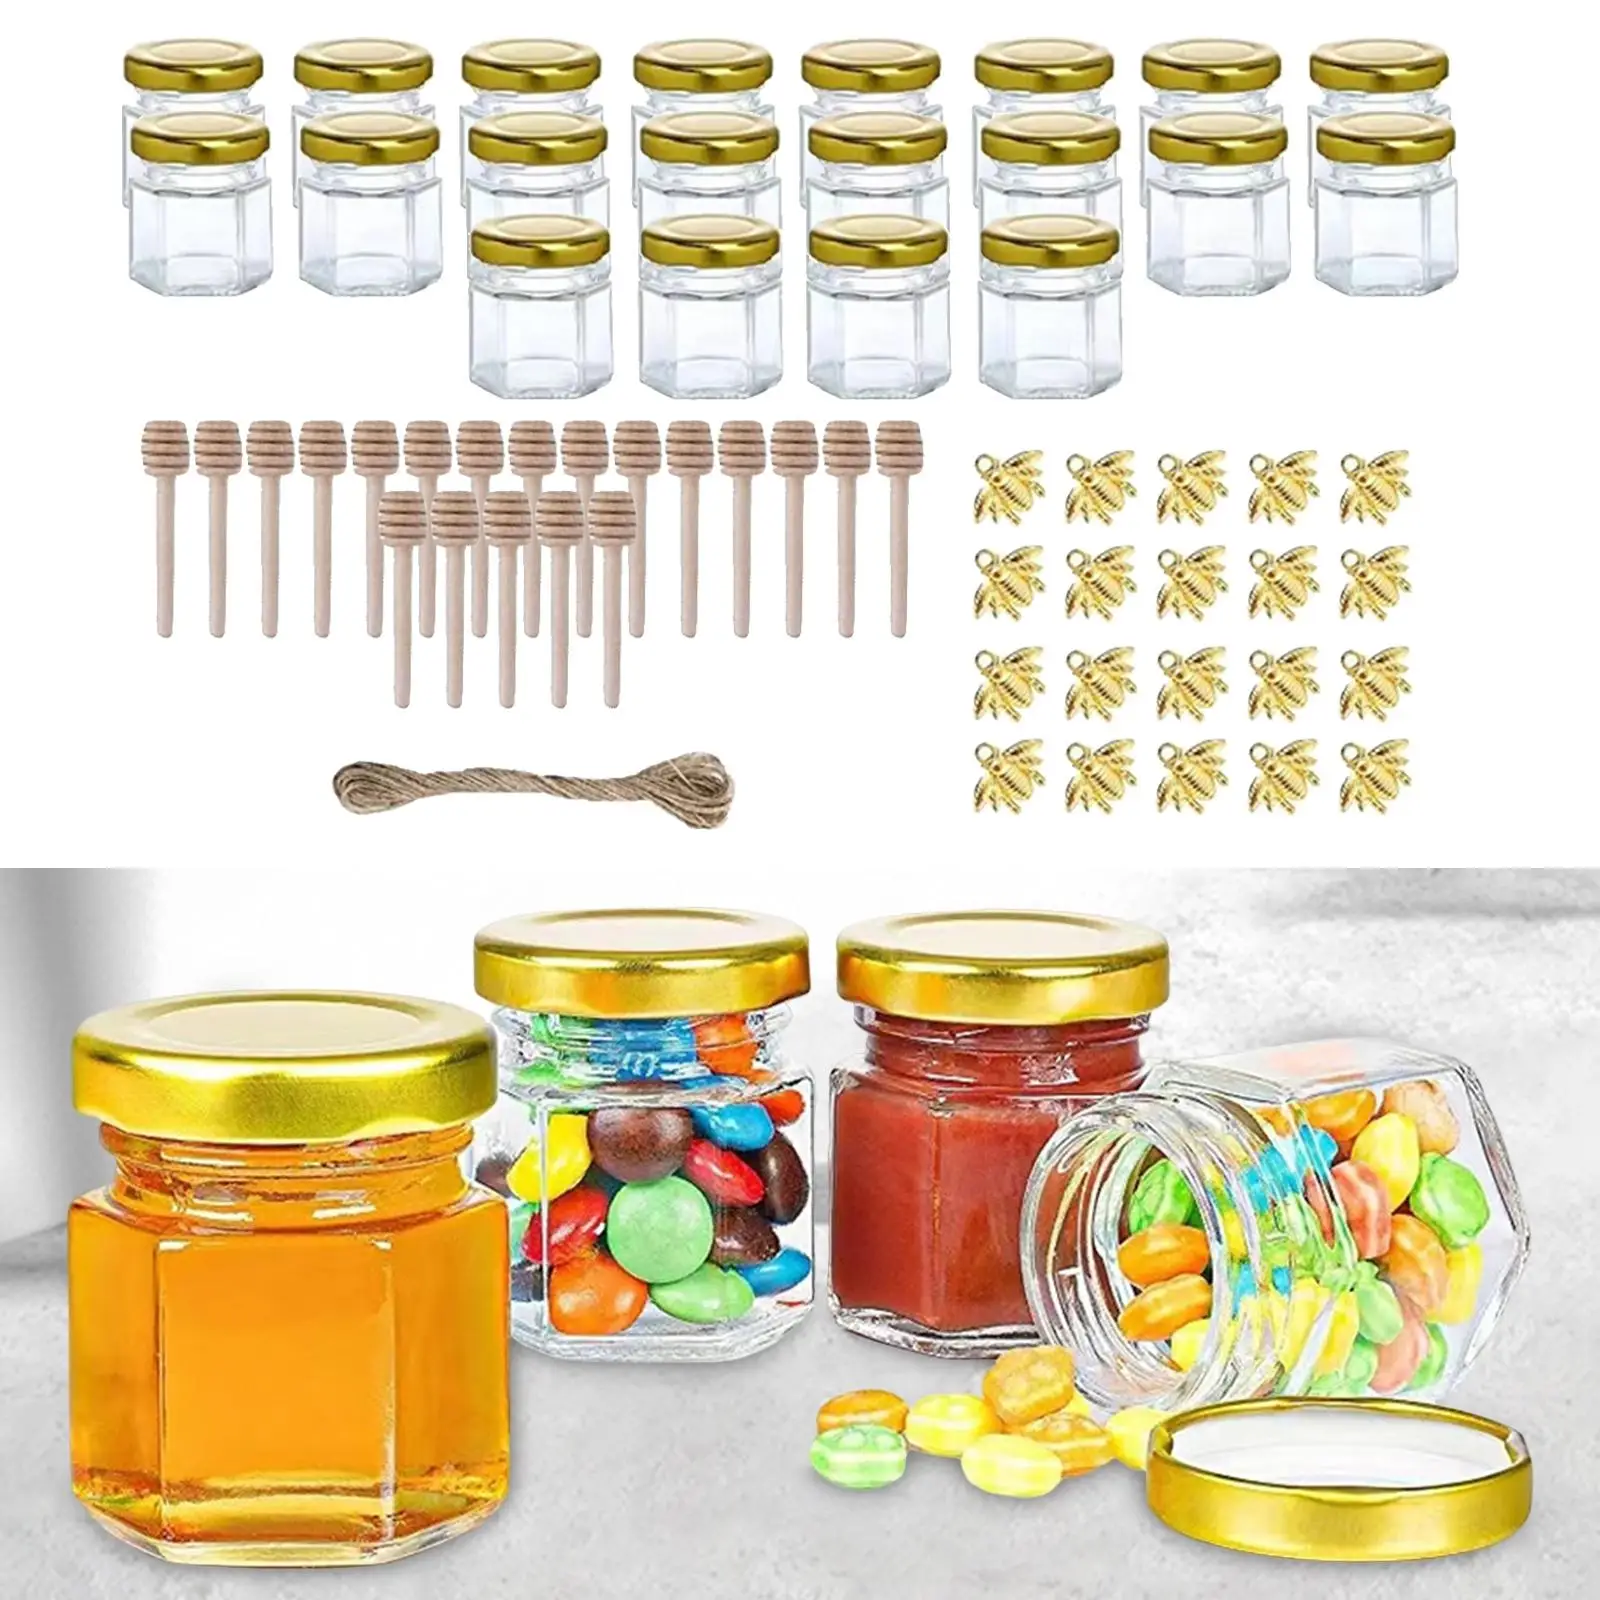 20 Pieces Small Glass Jars Airtight 45ml/1.5oz for Wedding Candle Making Party Favors Canning, Storing, and Decorative Purpose